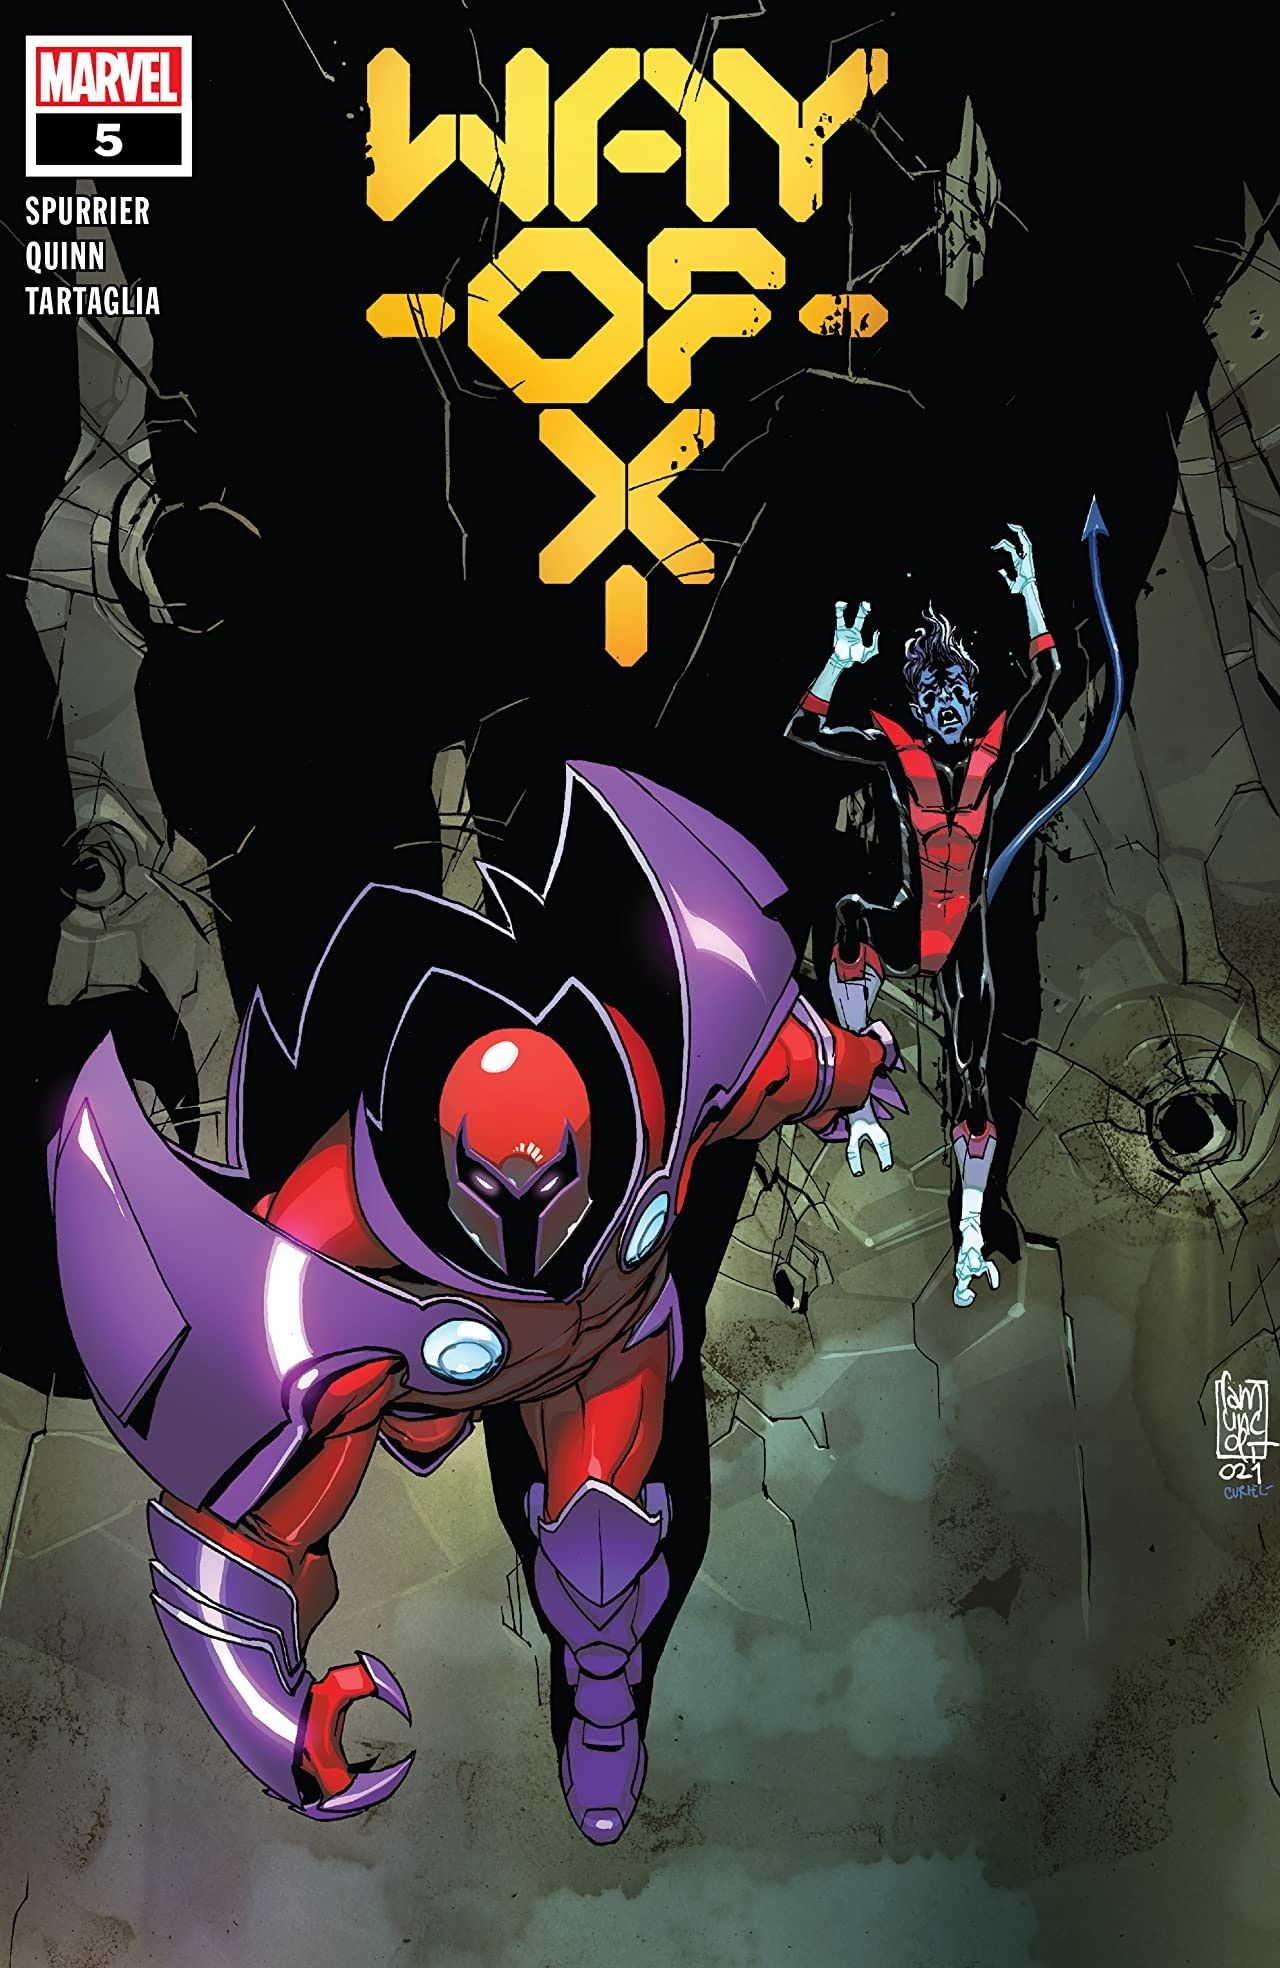 Onslaught fights Nightcrawler on the cover of Way of X 5 by Giuseppe Camuncoli